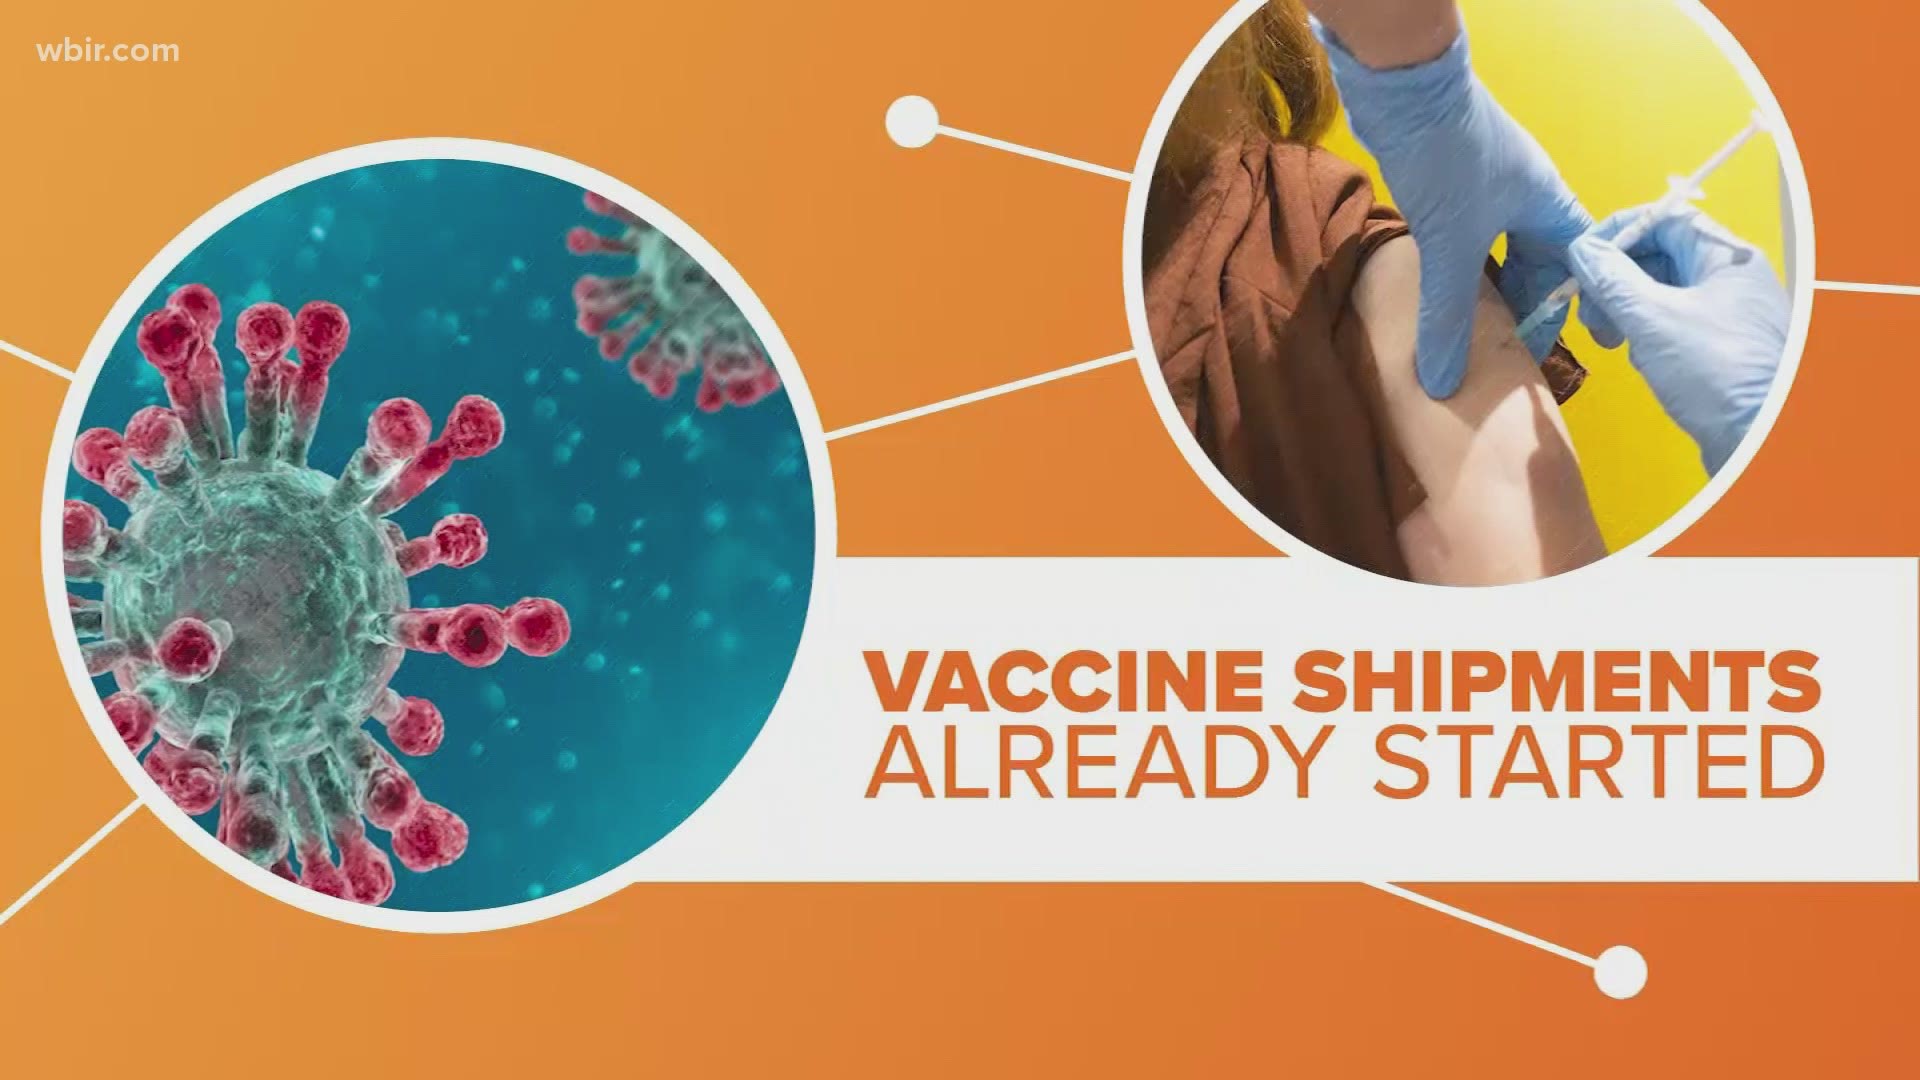 The FDA still has not approved a coronavirus vaccine but that has not stopped doses from being shipped across the country.